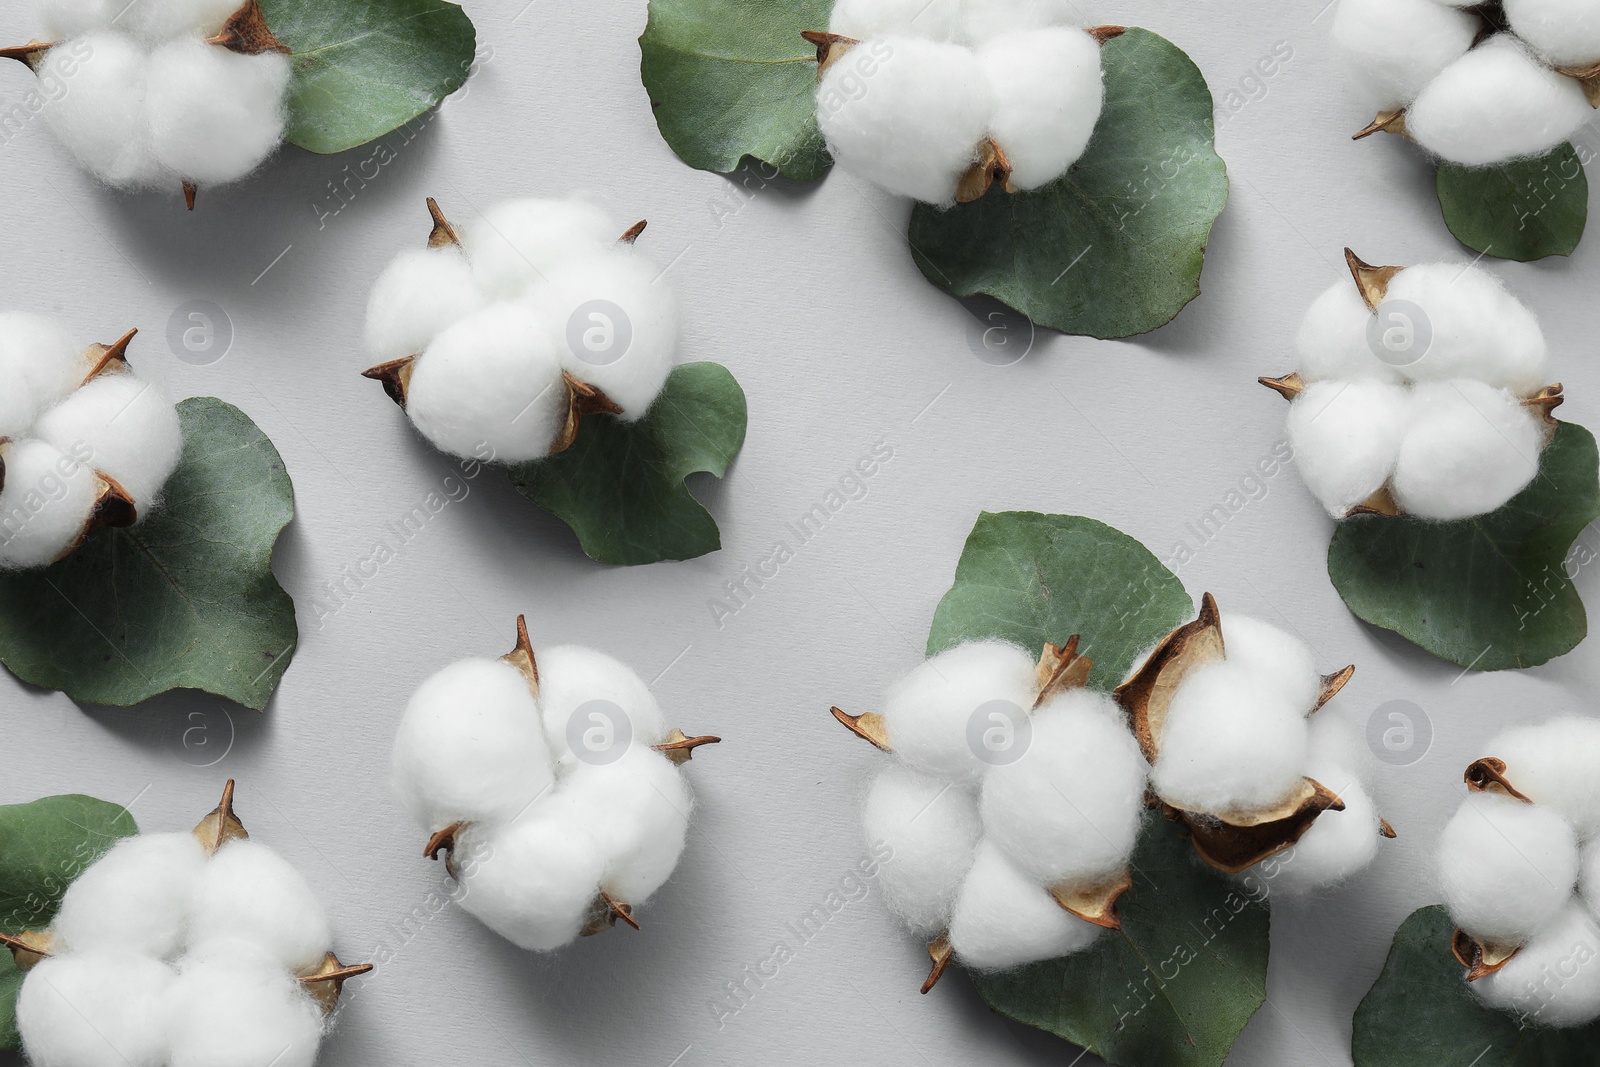 Photo of Cotton flowers and eucalyptus leaves on light grey background, flat lay. Space for text